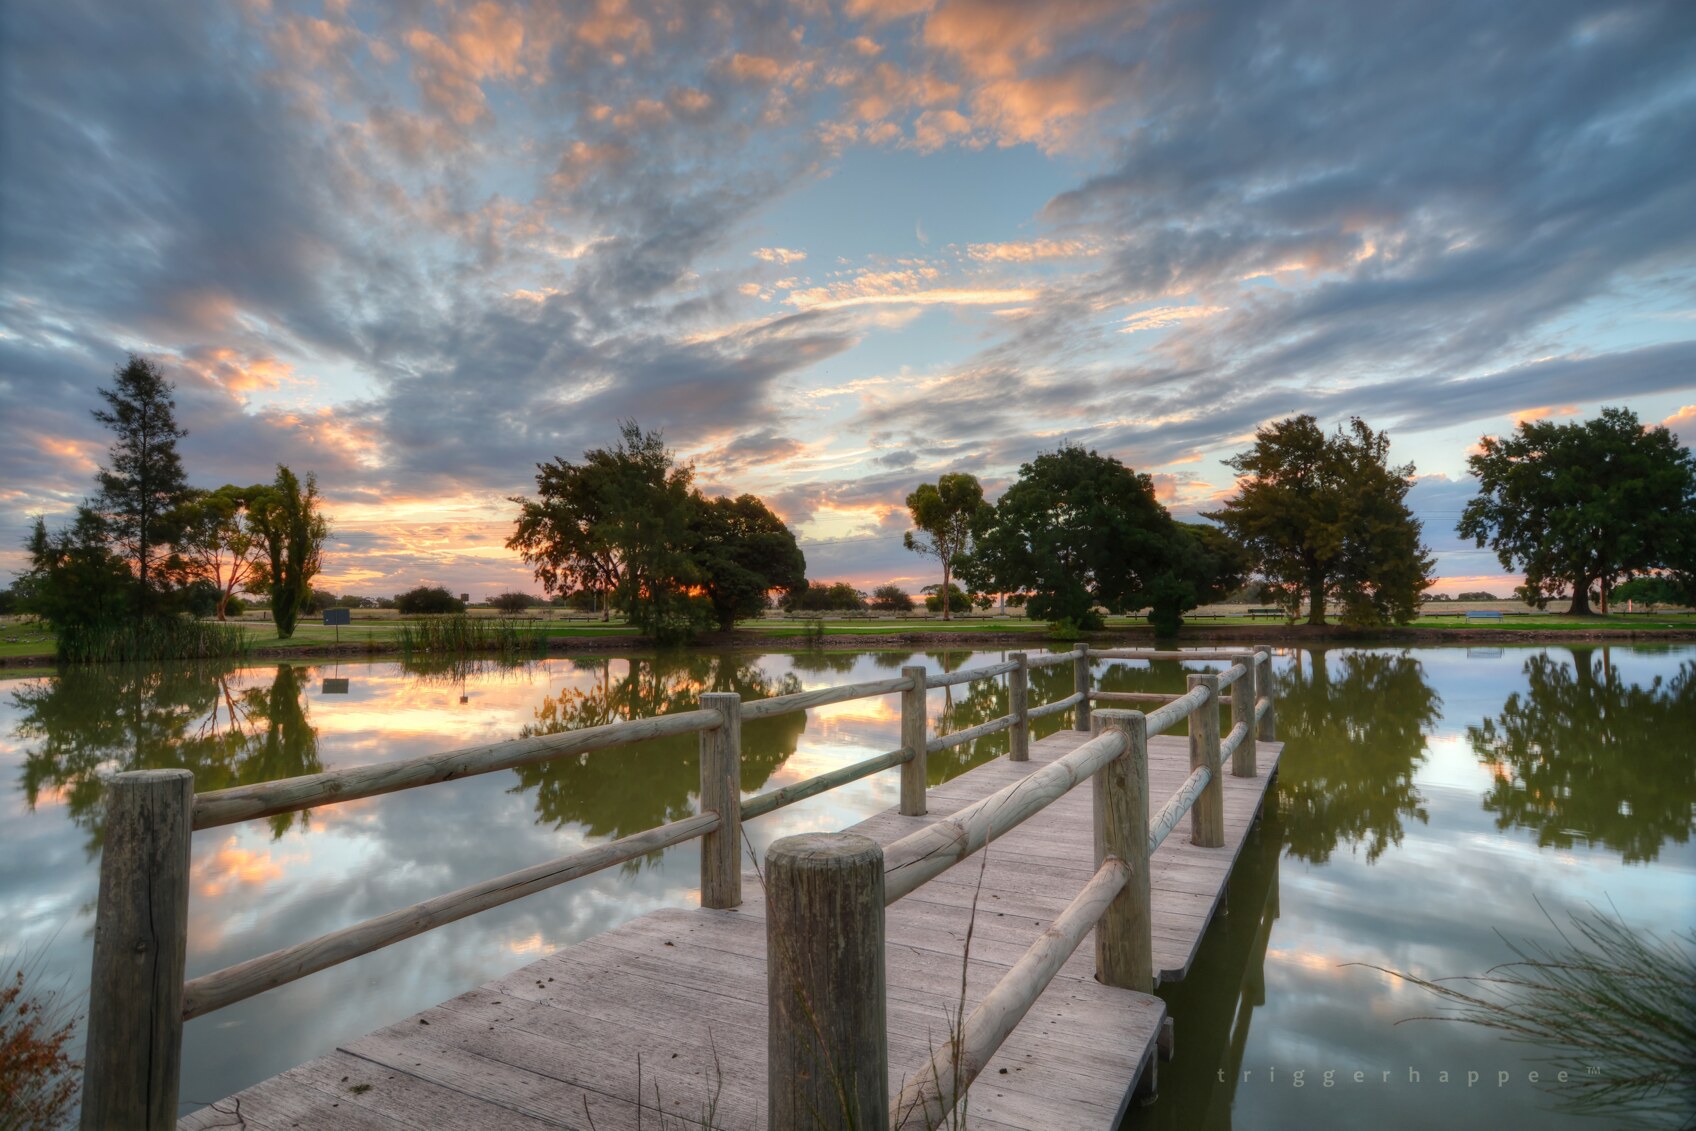 Sunset over the jetty at McCaughey Park in Yanco Leeton Shire NSW